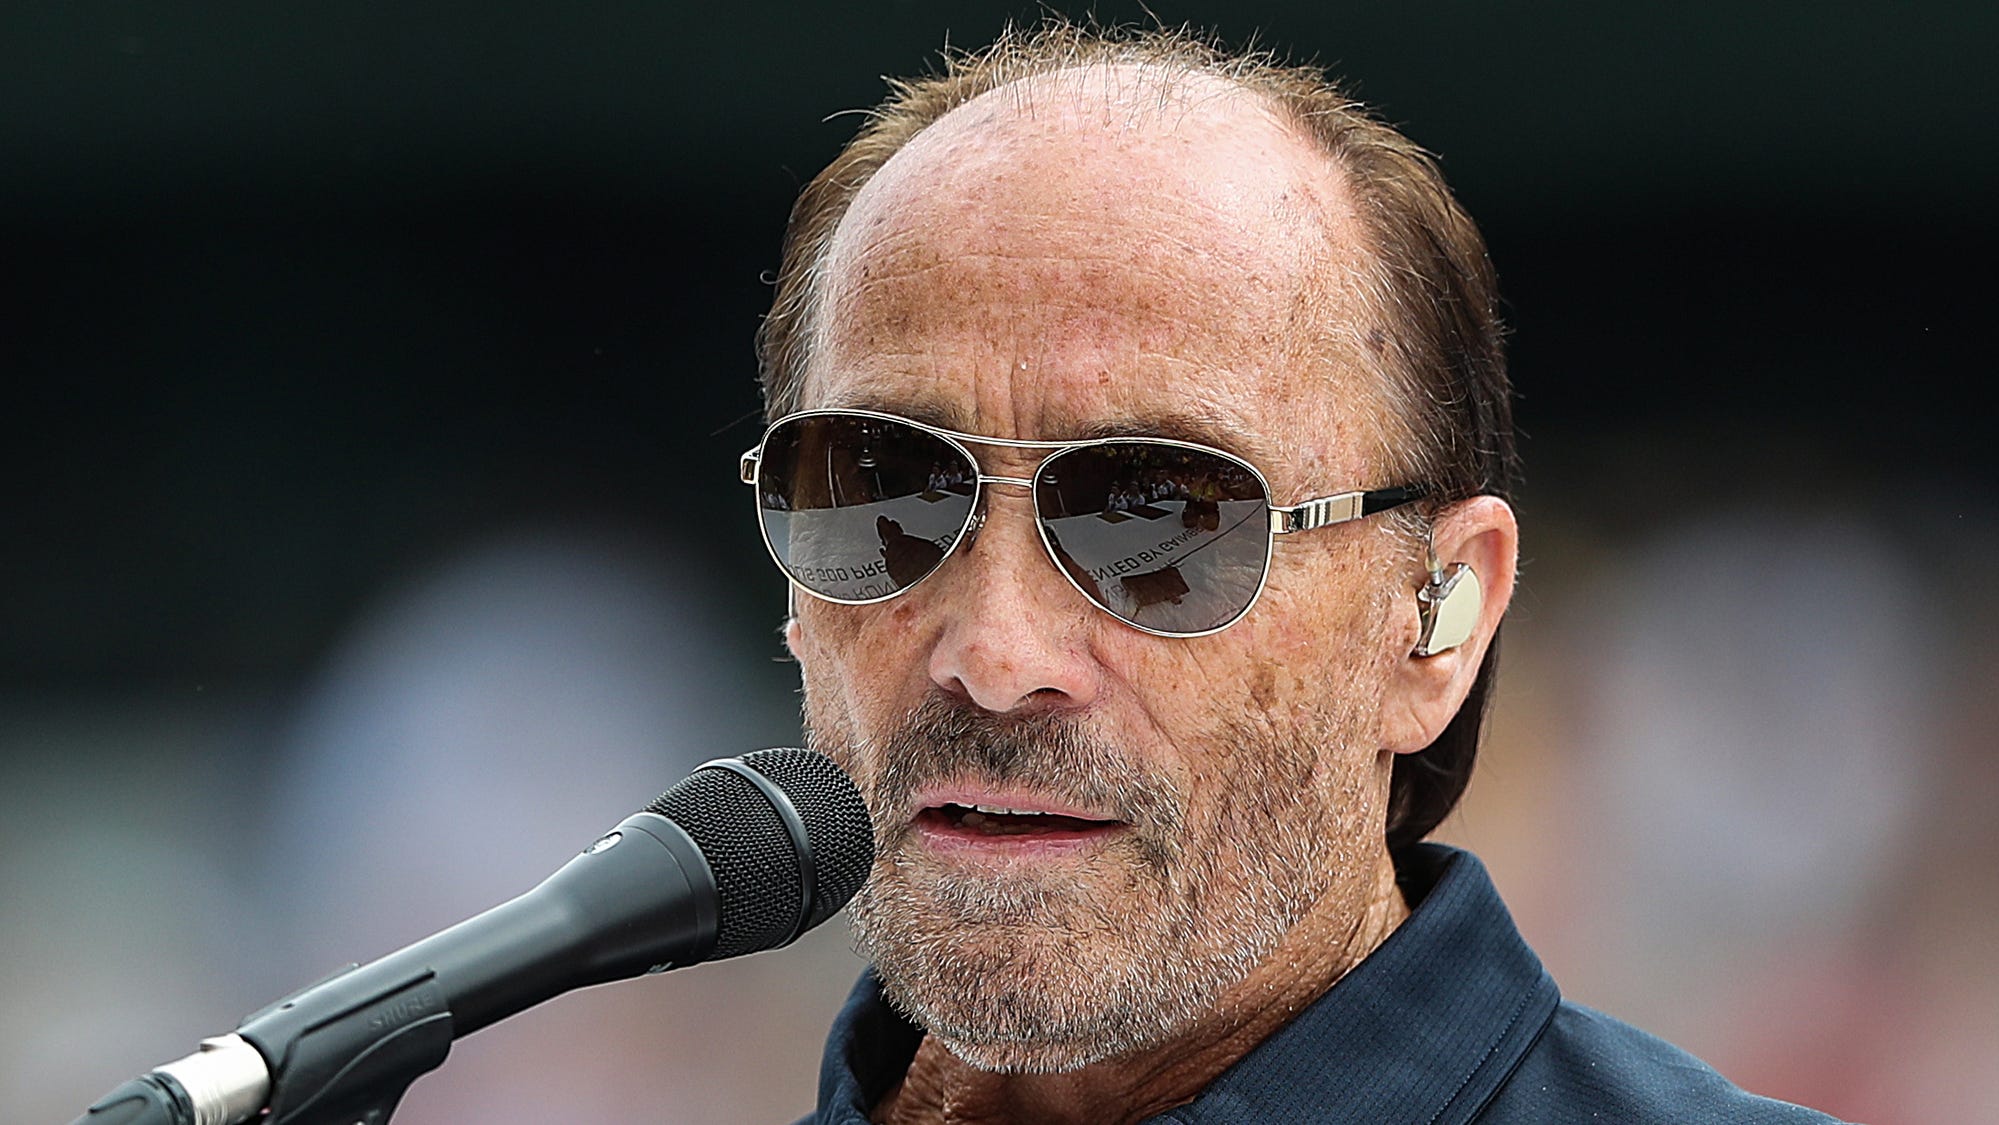 Lee Greenwood's hit song inspires new 'God Bless the USA Bible'